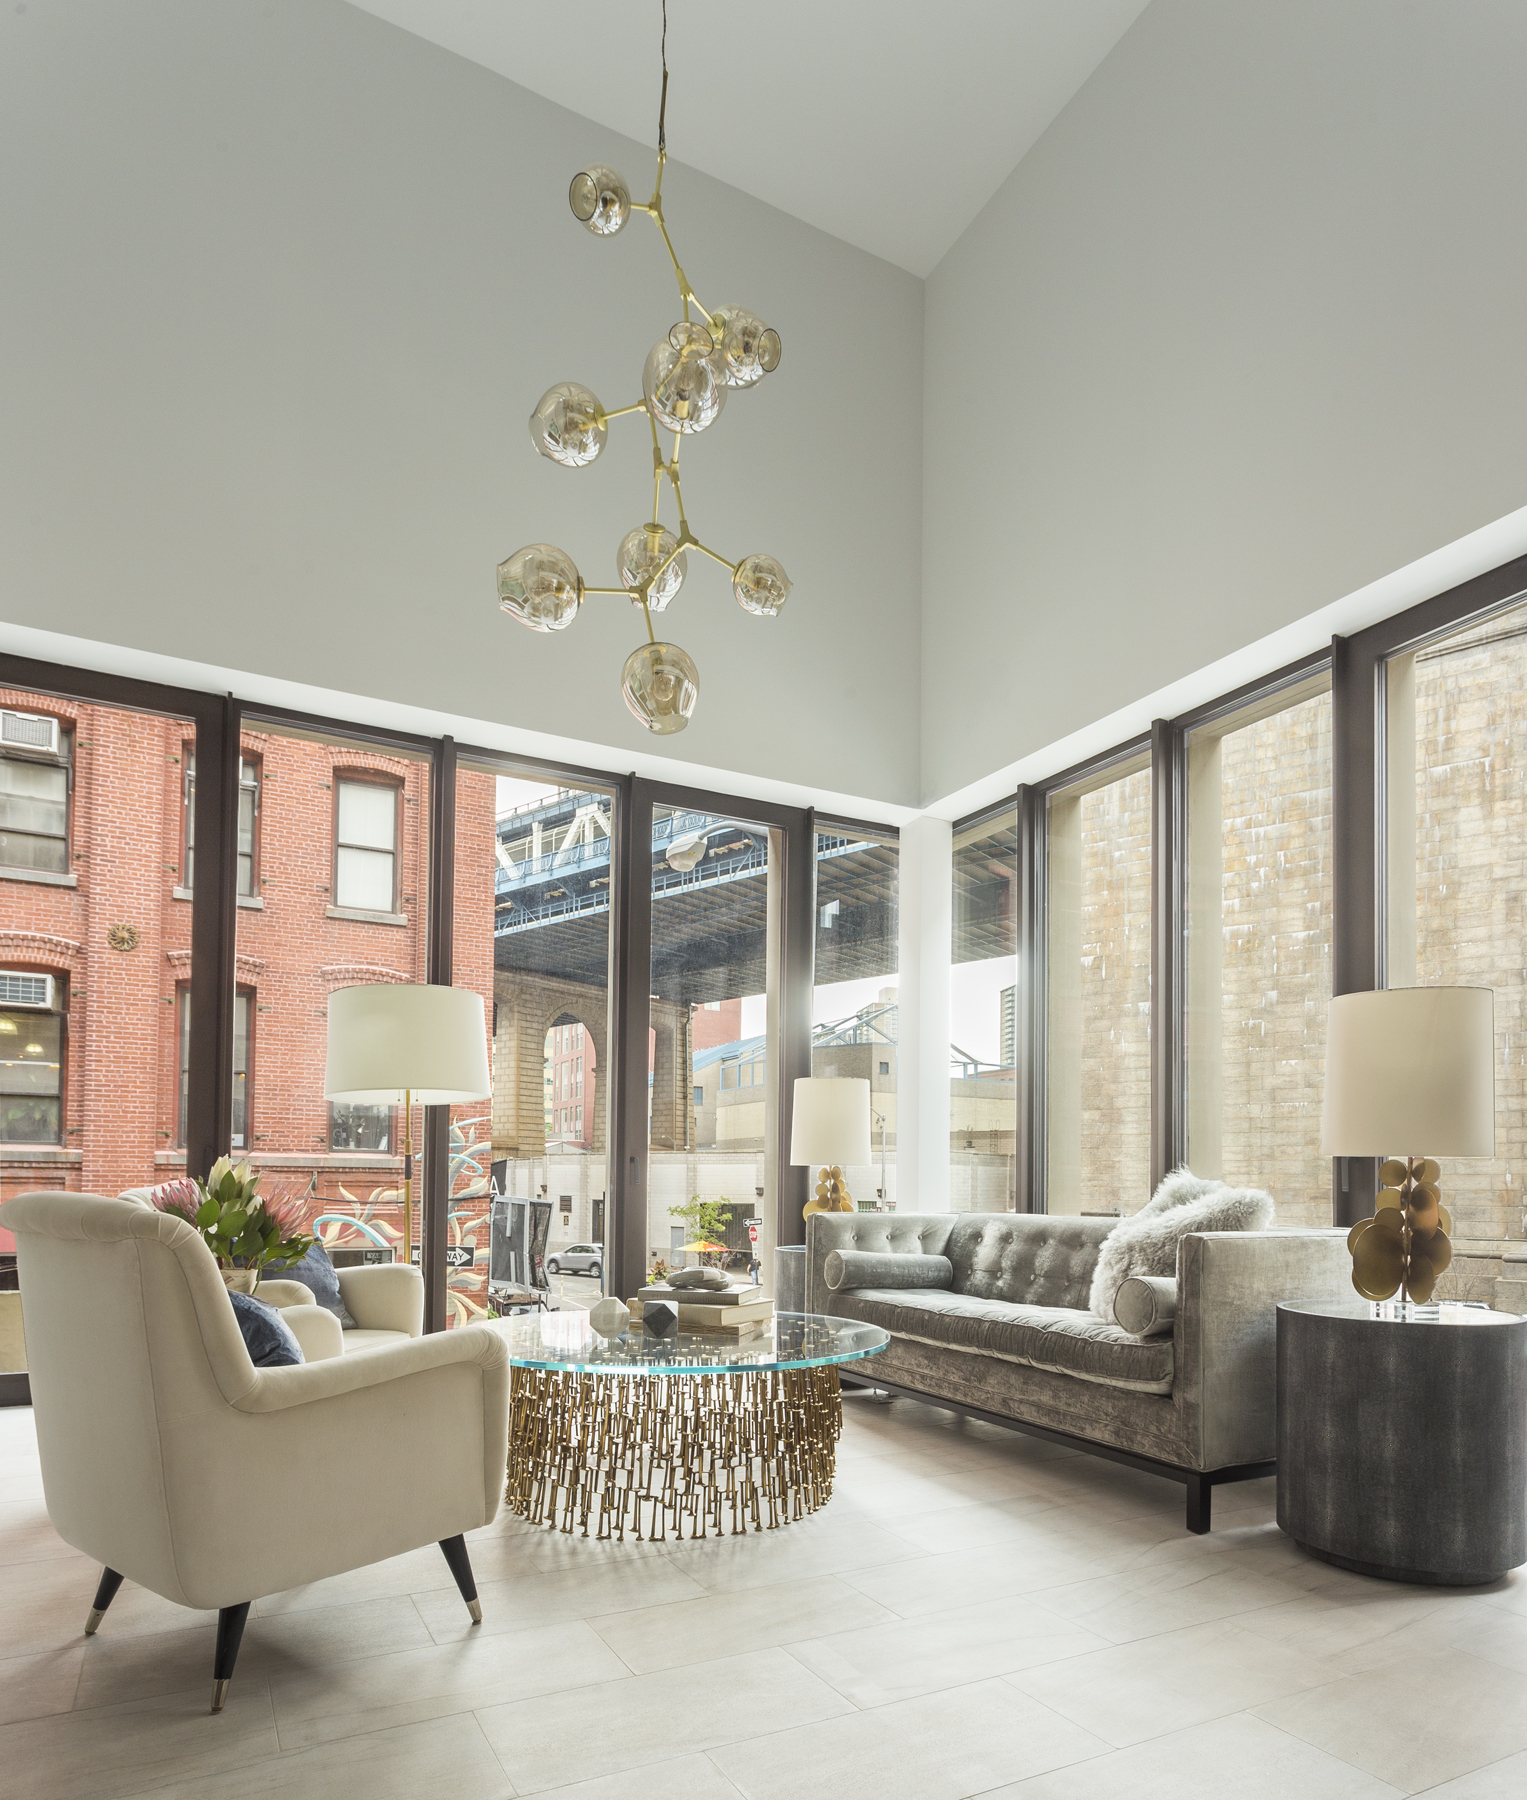 DUMBO Townhouses in New York by Alloy